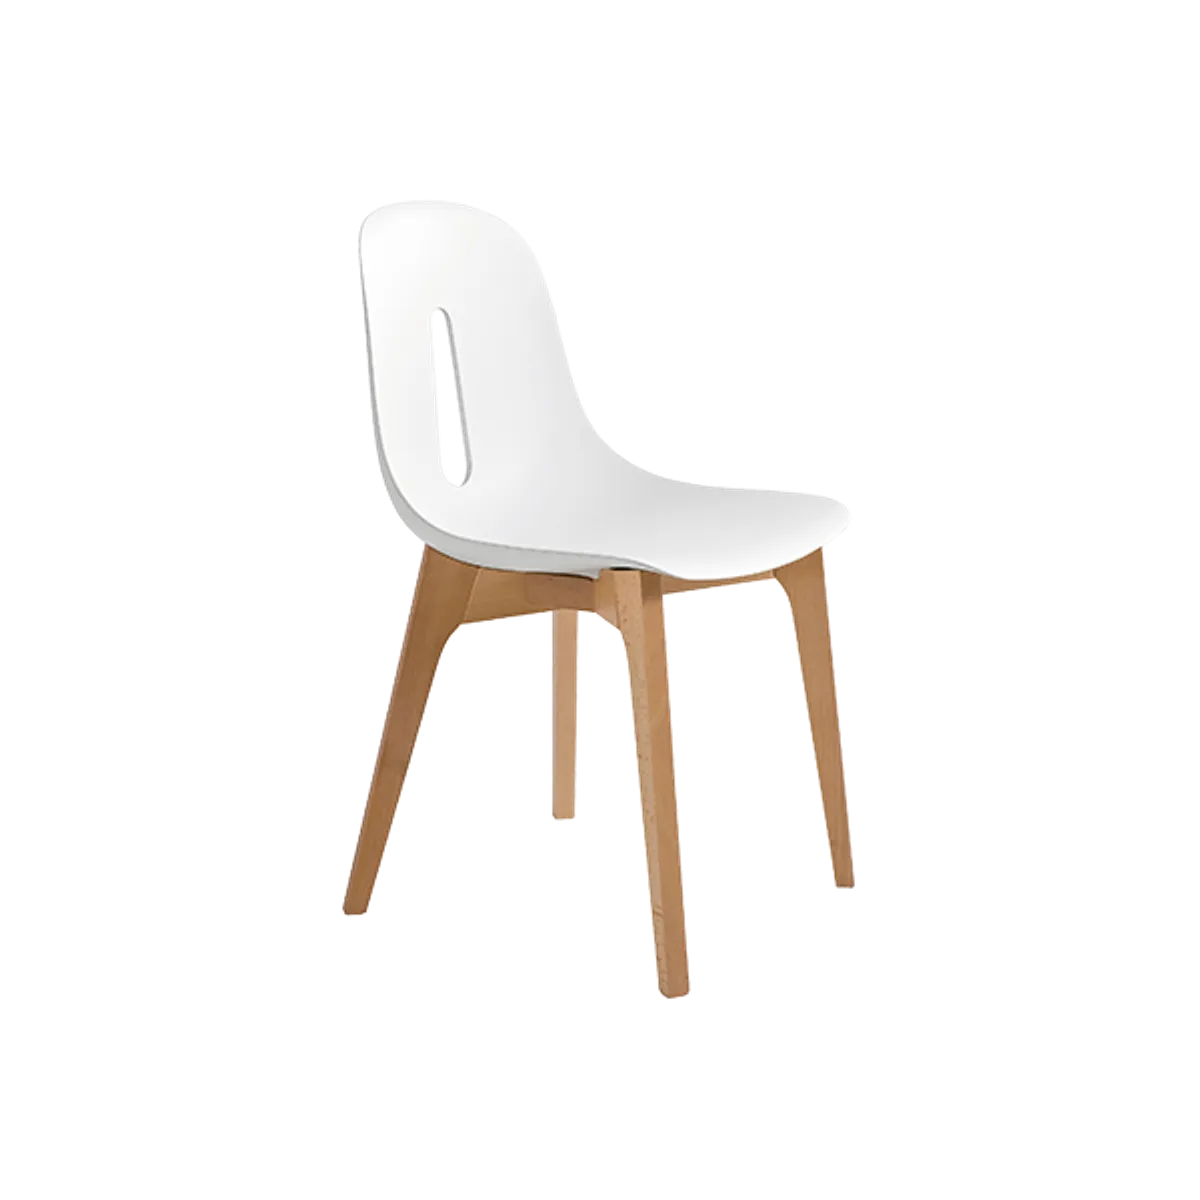 Web Gotham Wooden Chair Png